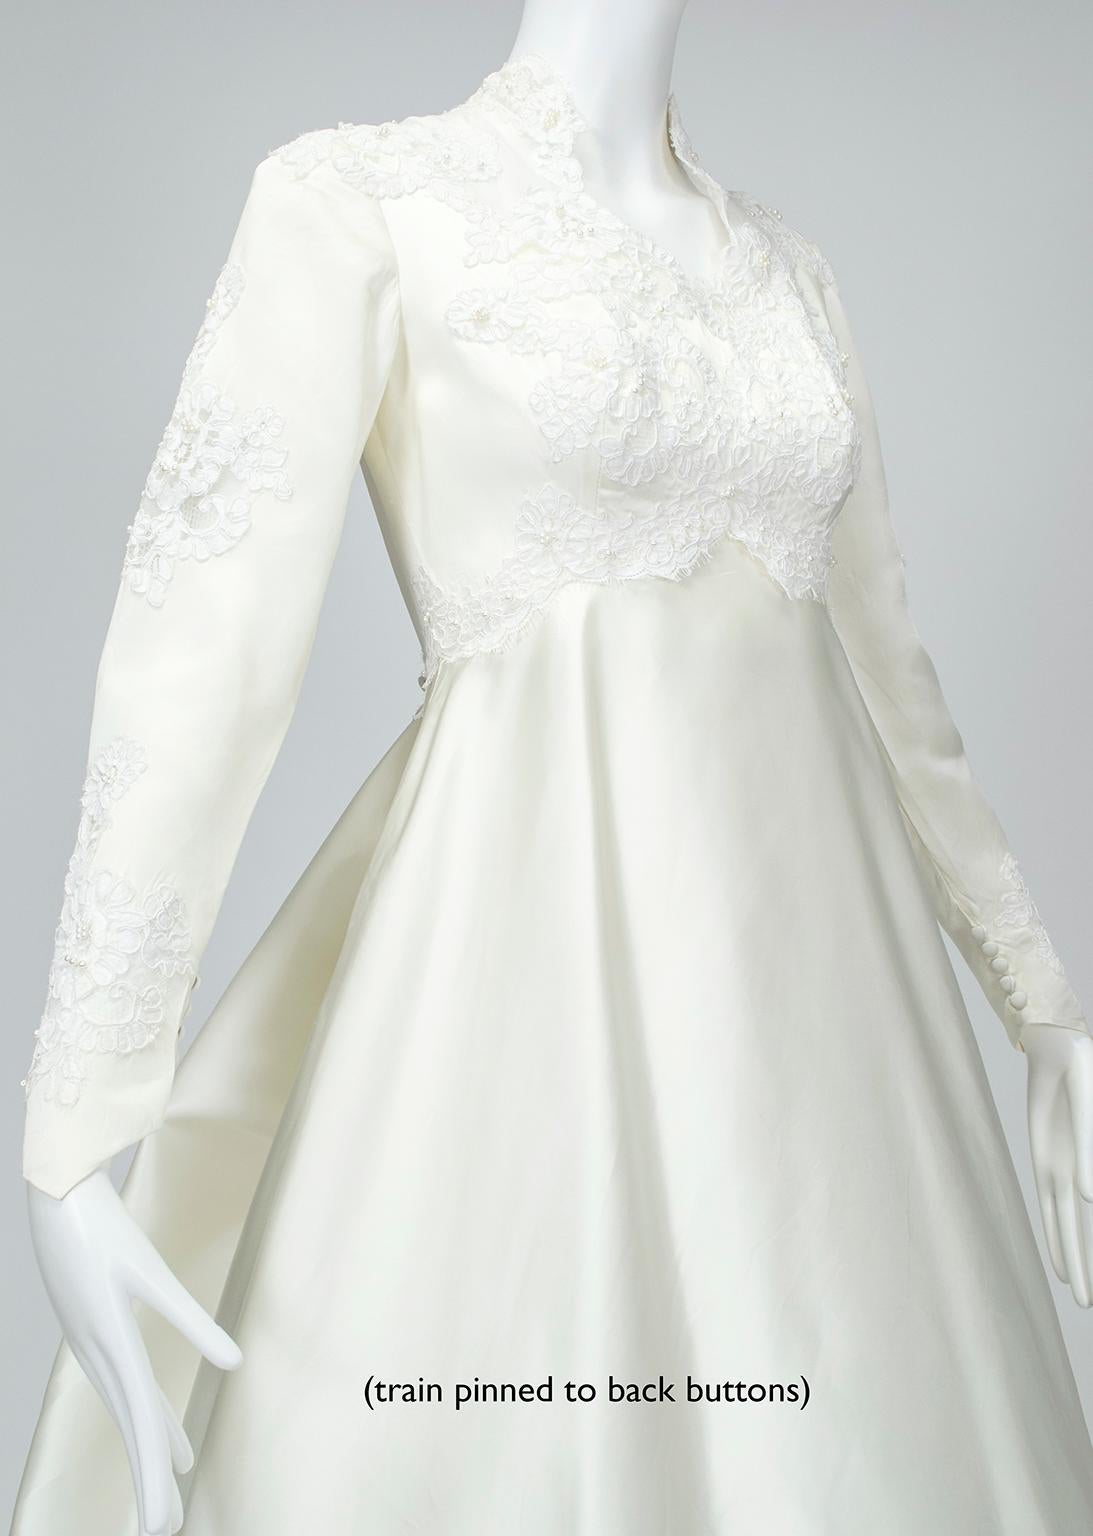 Women's Ivory Satin Queen Anne Empire Wedding Gown w Adjustable Train/Bustle – XS, 1950s For Sale